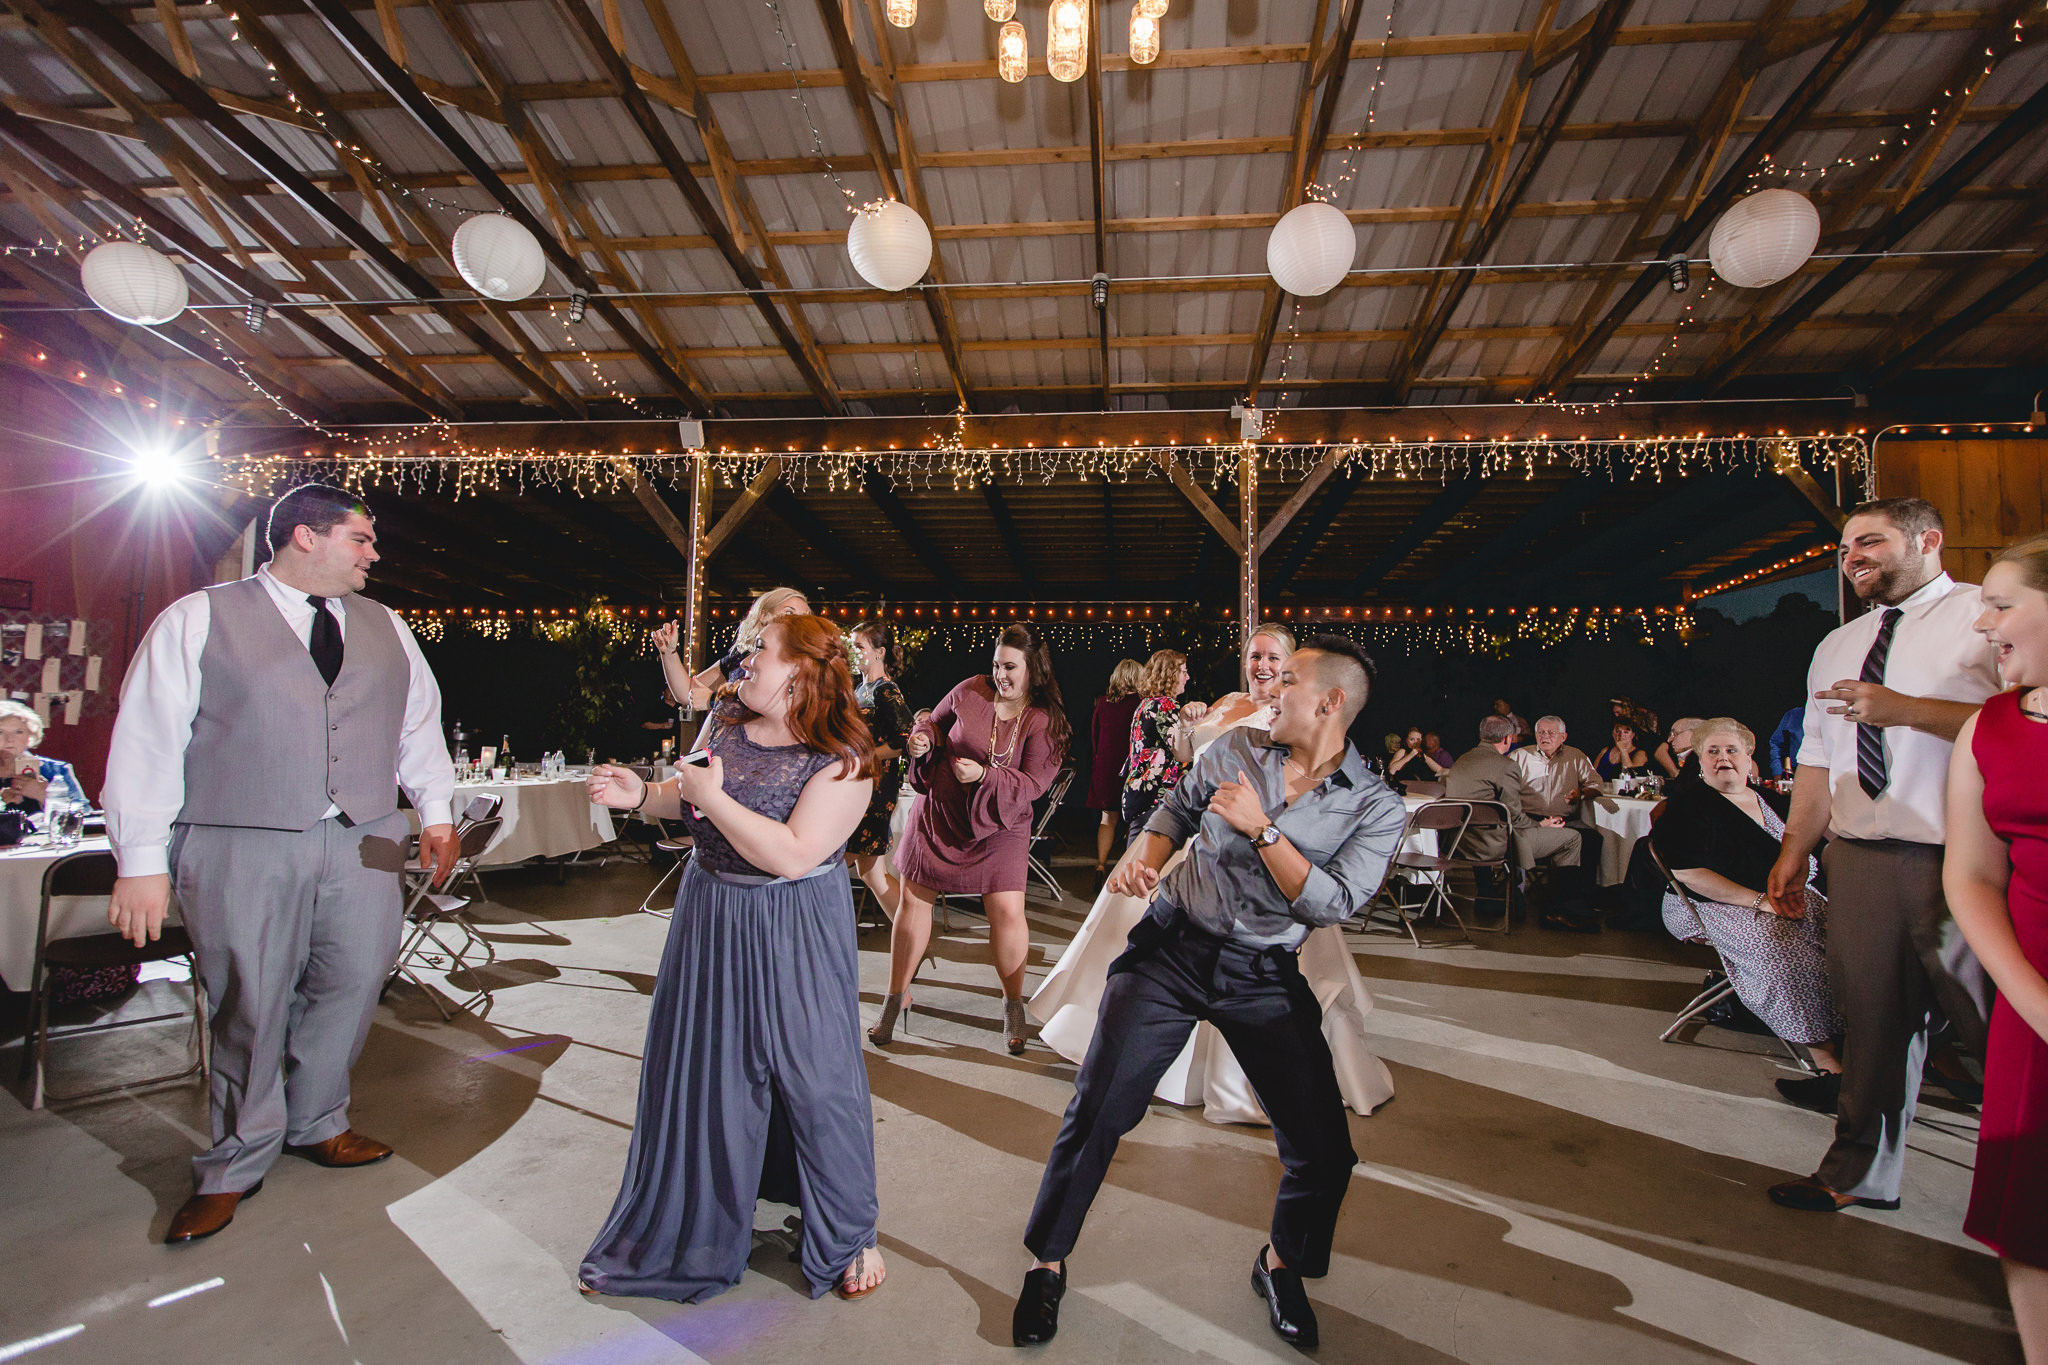 Wedding guests on the dance floor at the Barn at Soergel Hollow